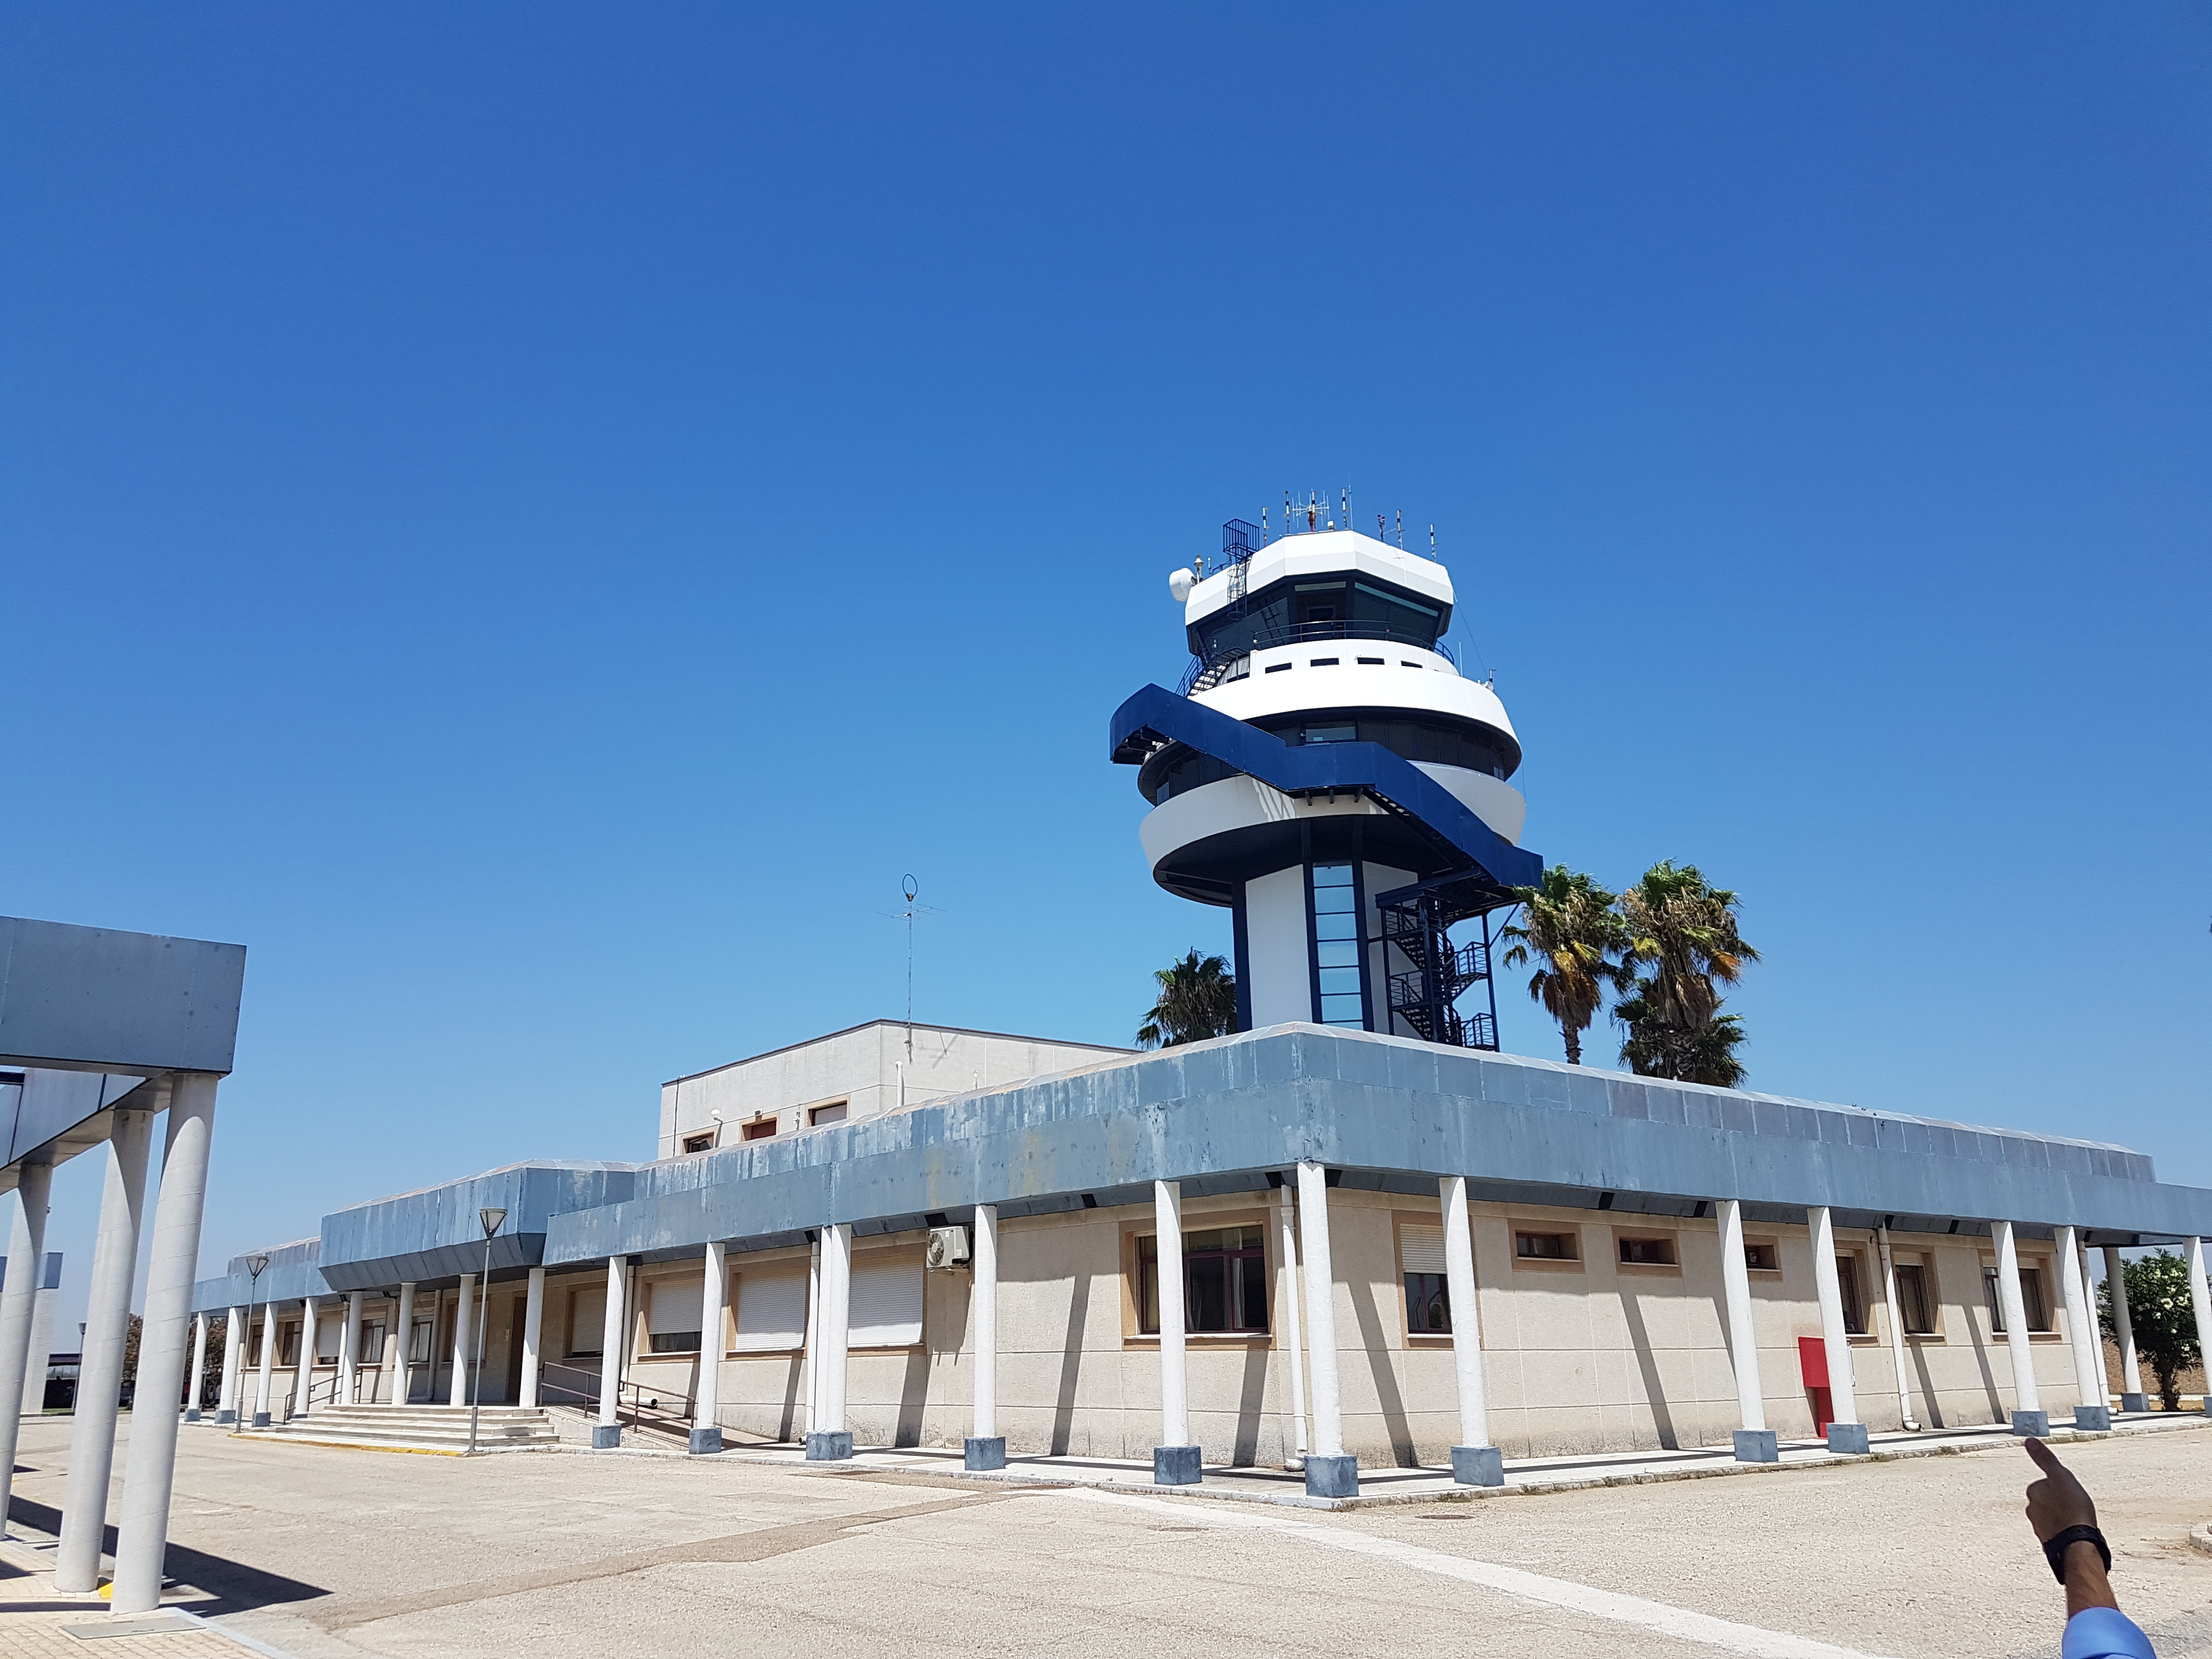 Frequentis teams up with Spanish ANSP to enhance airspace safety